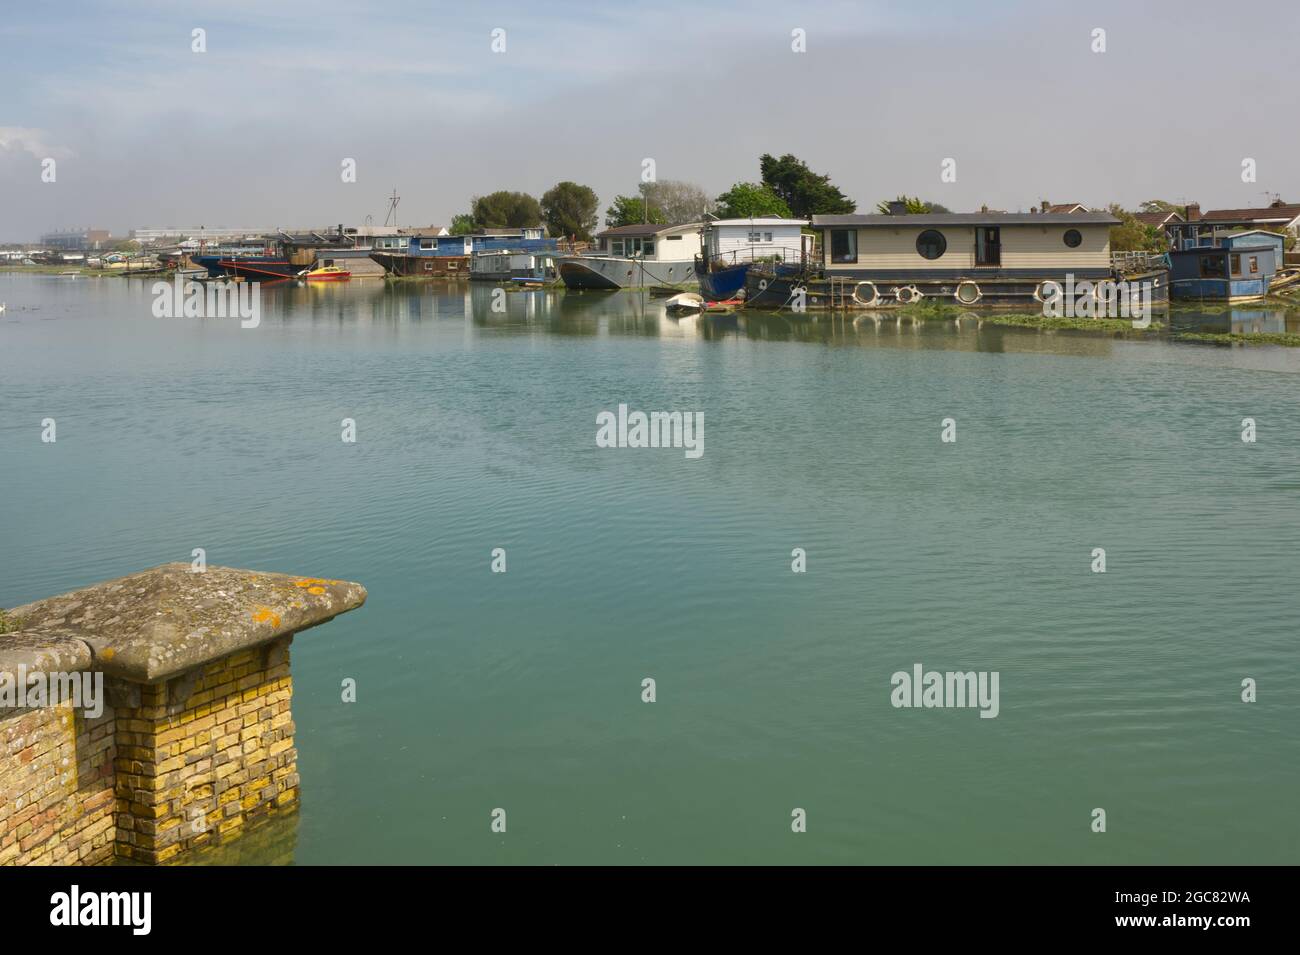 Houseboats moored on River Adur at Shoreham, West Sussex, England Stock Photo